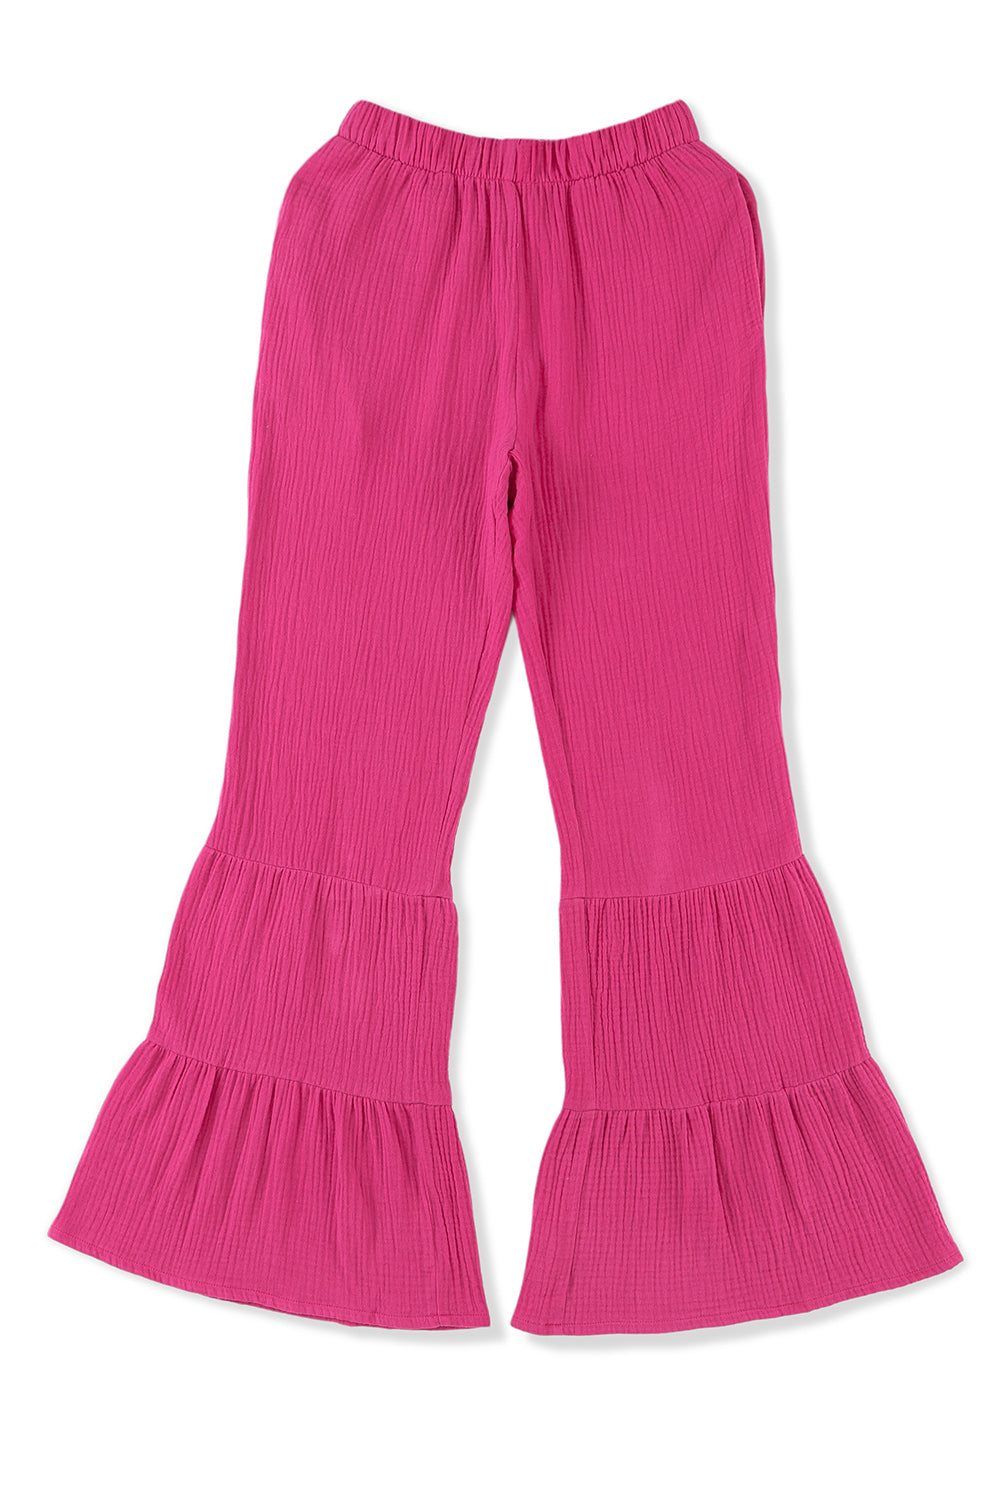 Long Flare Pants with Pocket - Pink / S - Bottoms - Pants - 7 - 2024